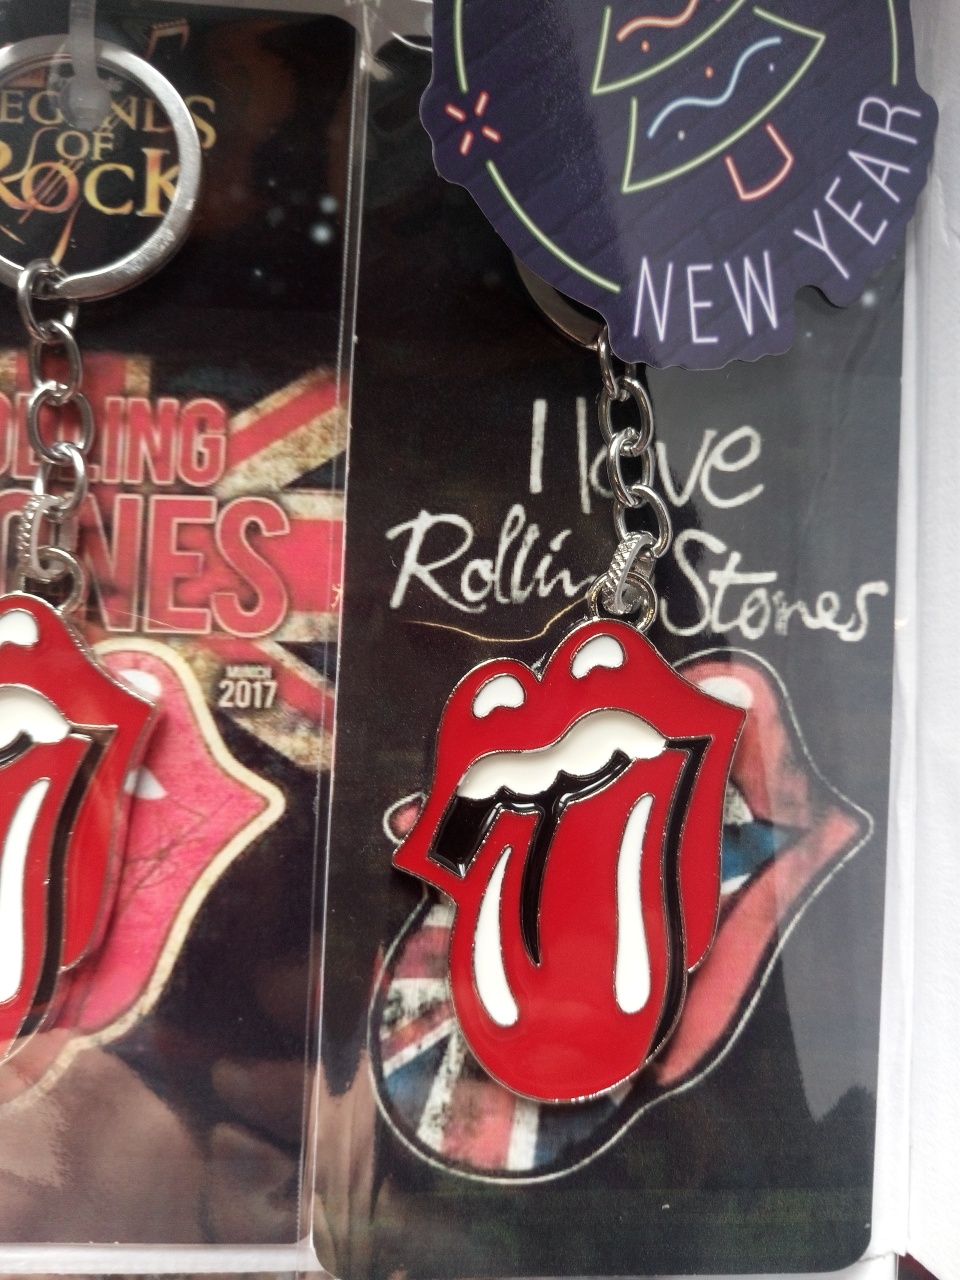 Porta chaves Rolling Stones Rock Legends Pack com Patch 6€99